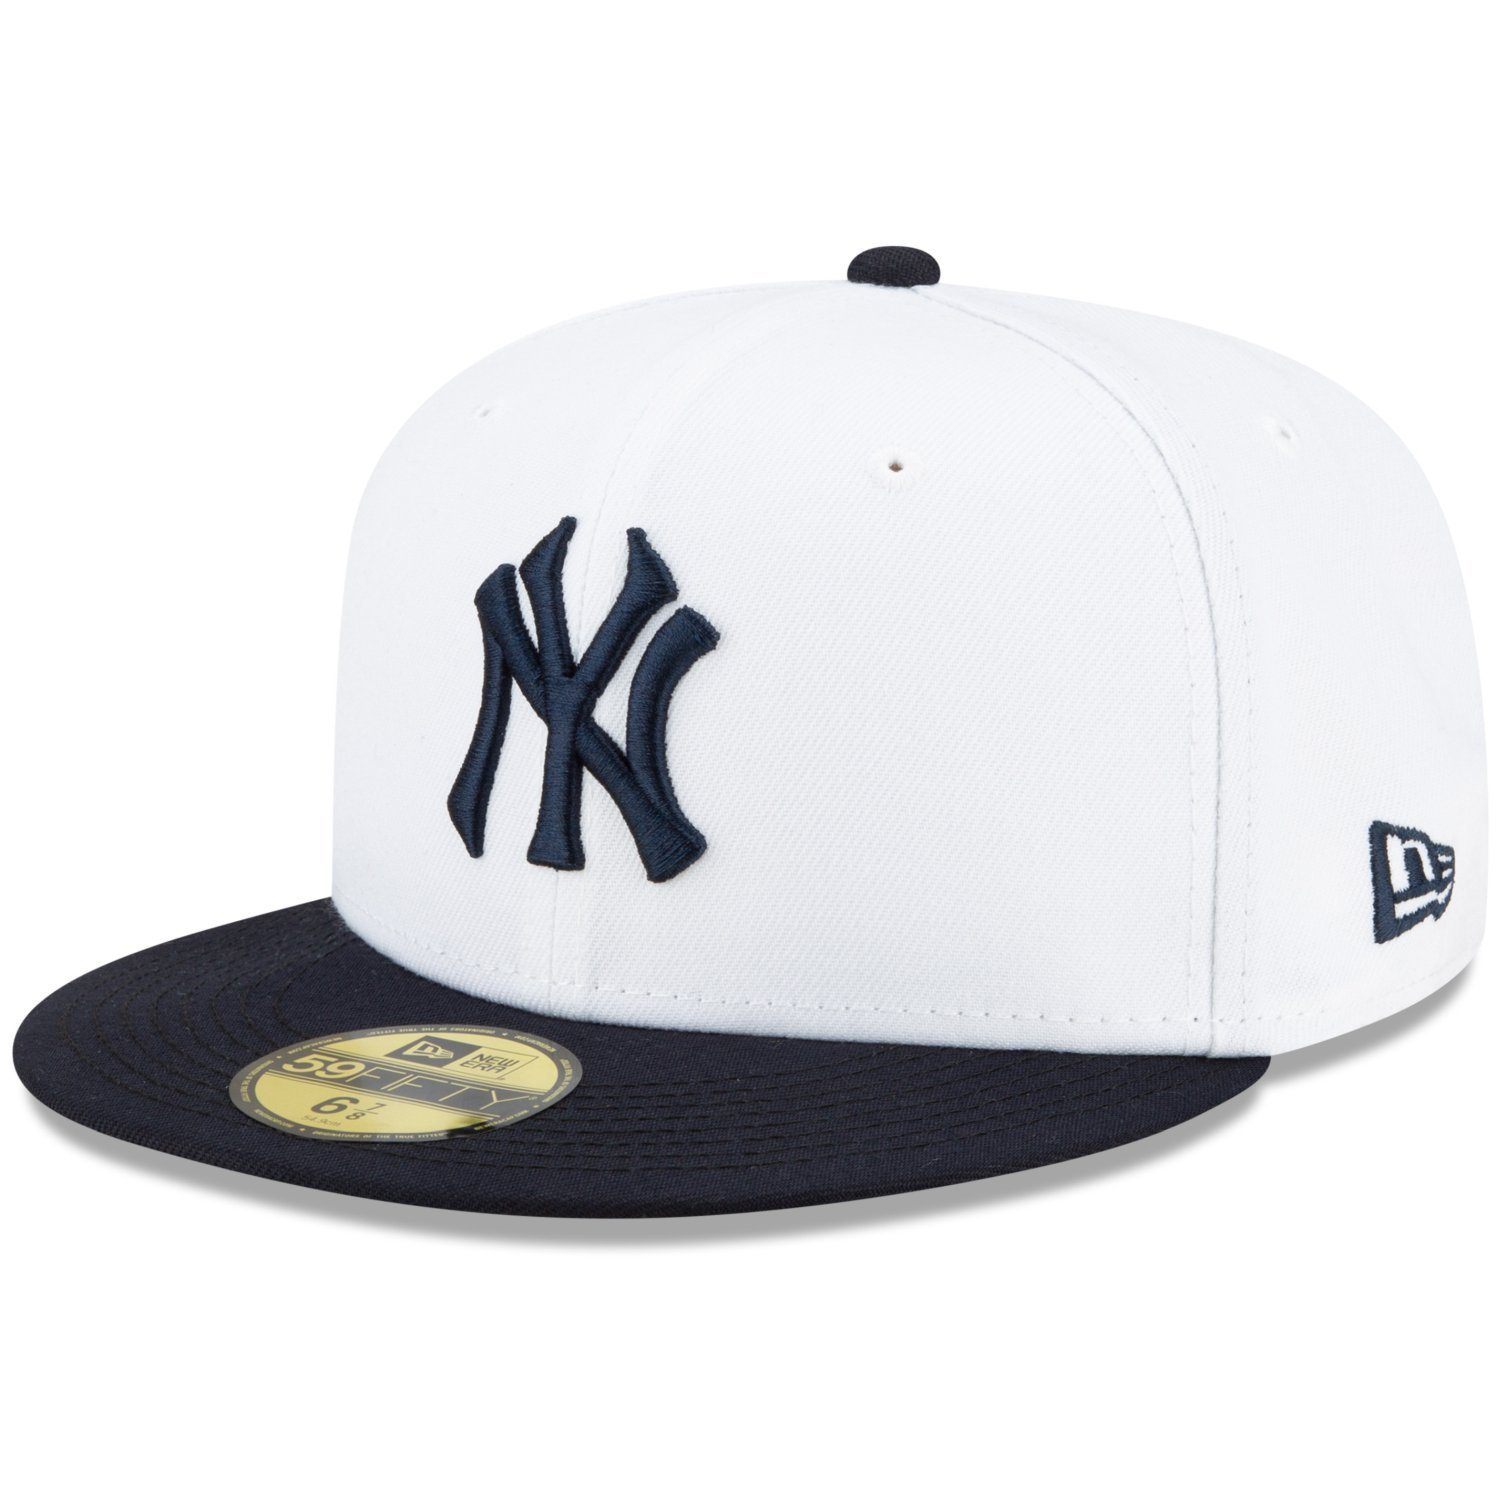 New Era Fitted Cap 1977 SERIES Yankees WORLD 59Fifty NY